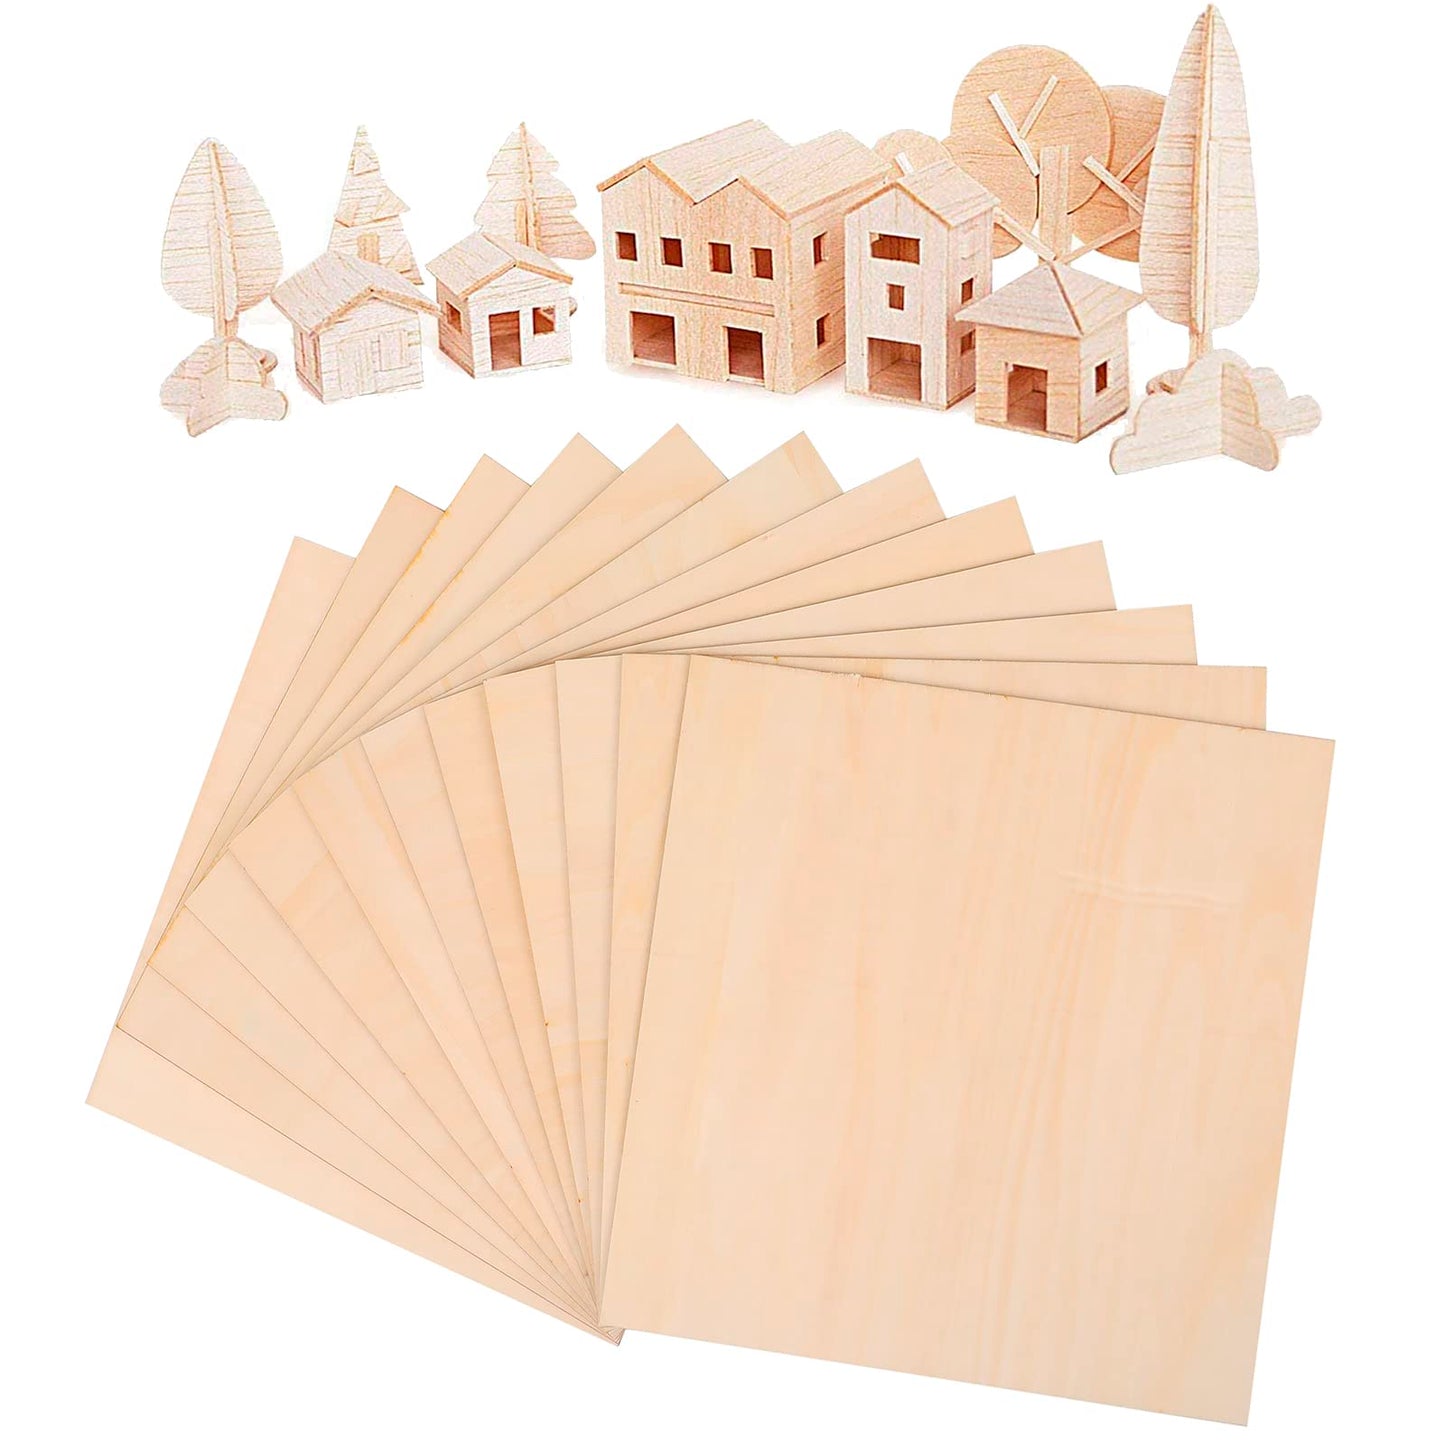 12 Pack Basswood Sheets for Crafts,12 x 12 x 1/8 Inch- 3mm Thick Plywood Sheets with Smooth Surfaces, Squares Bass Wood Boards for Laser Cutting,